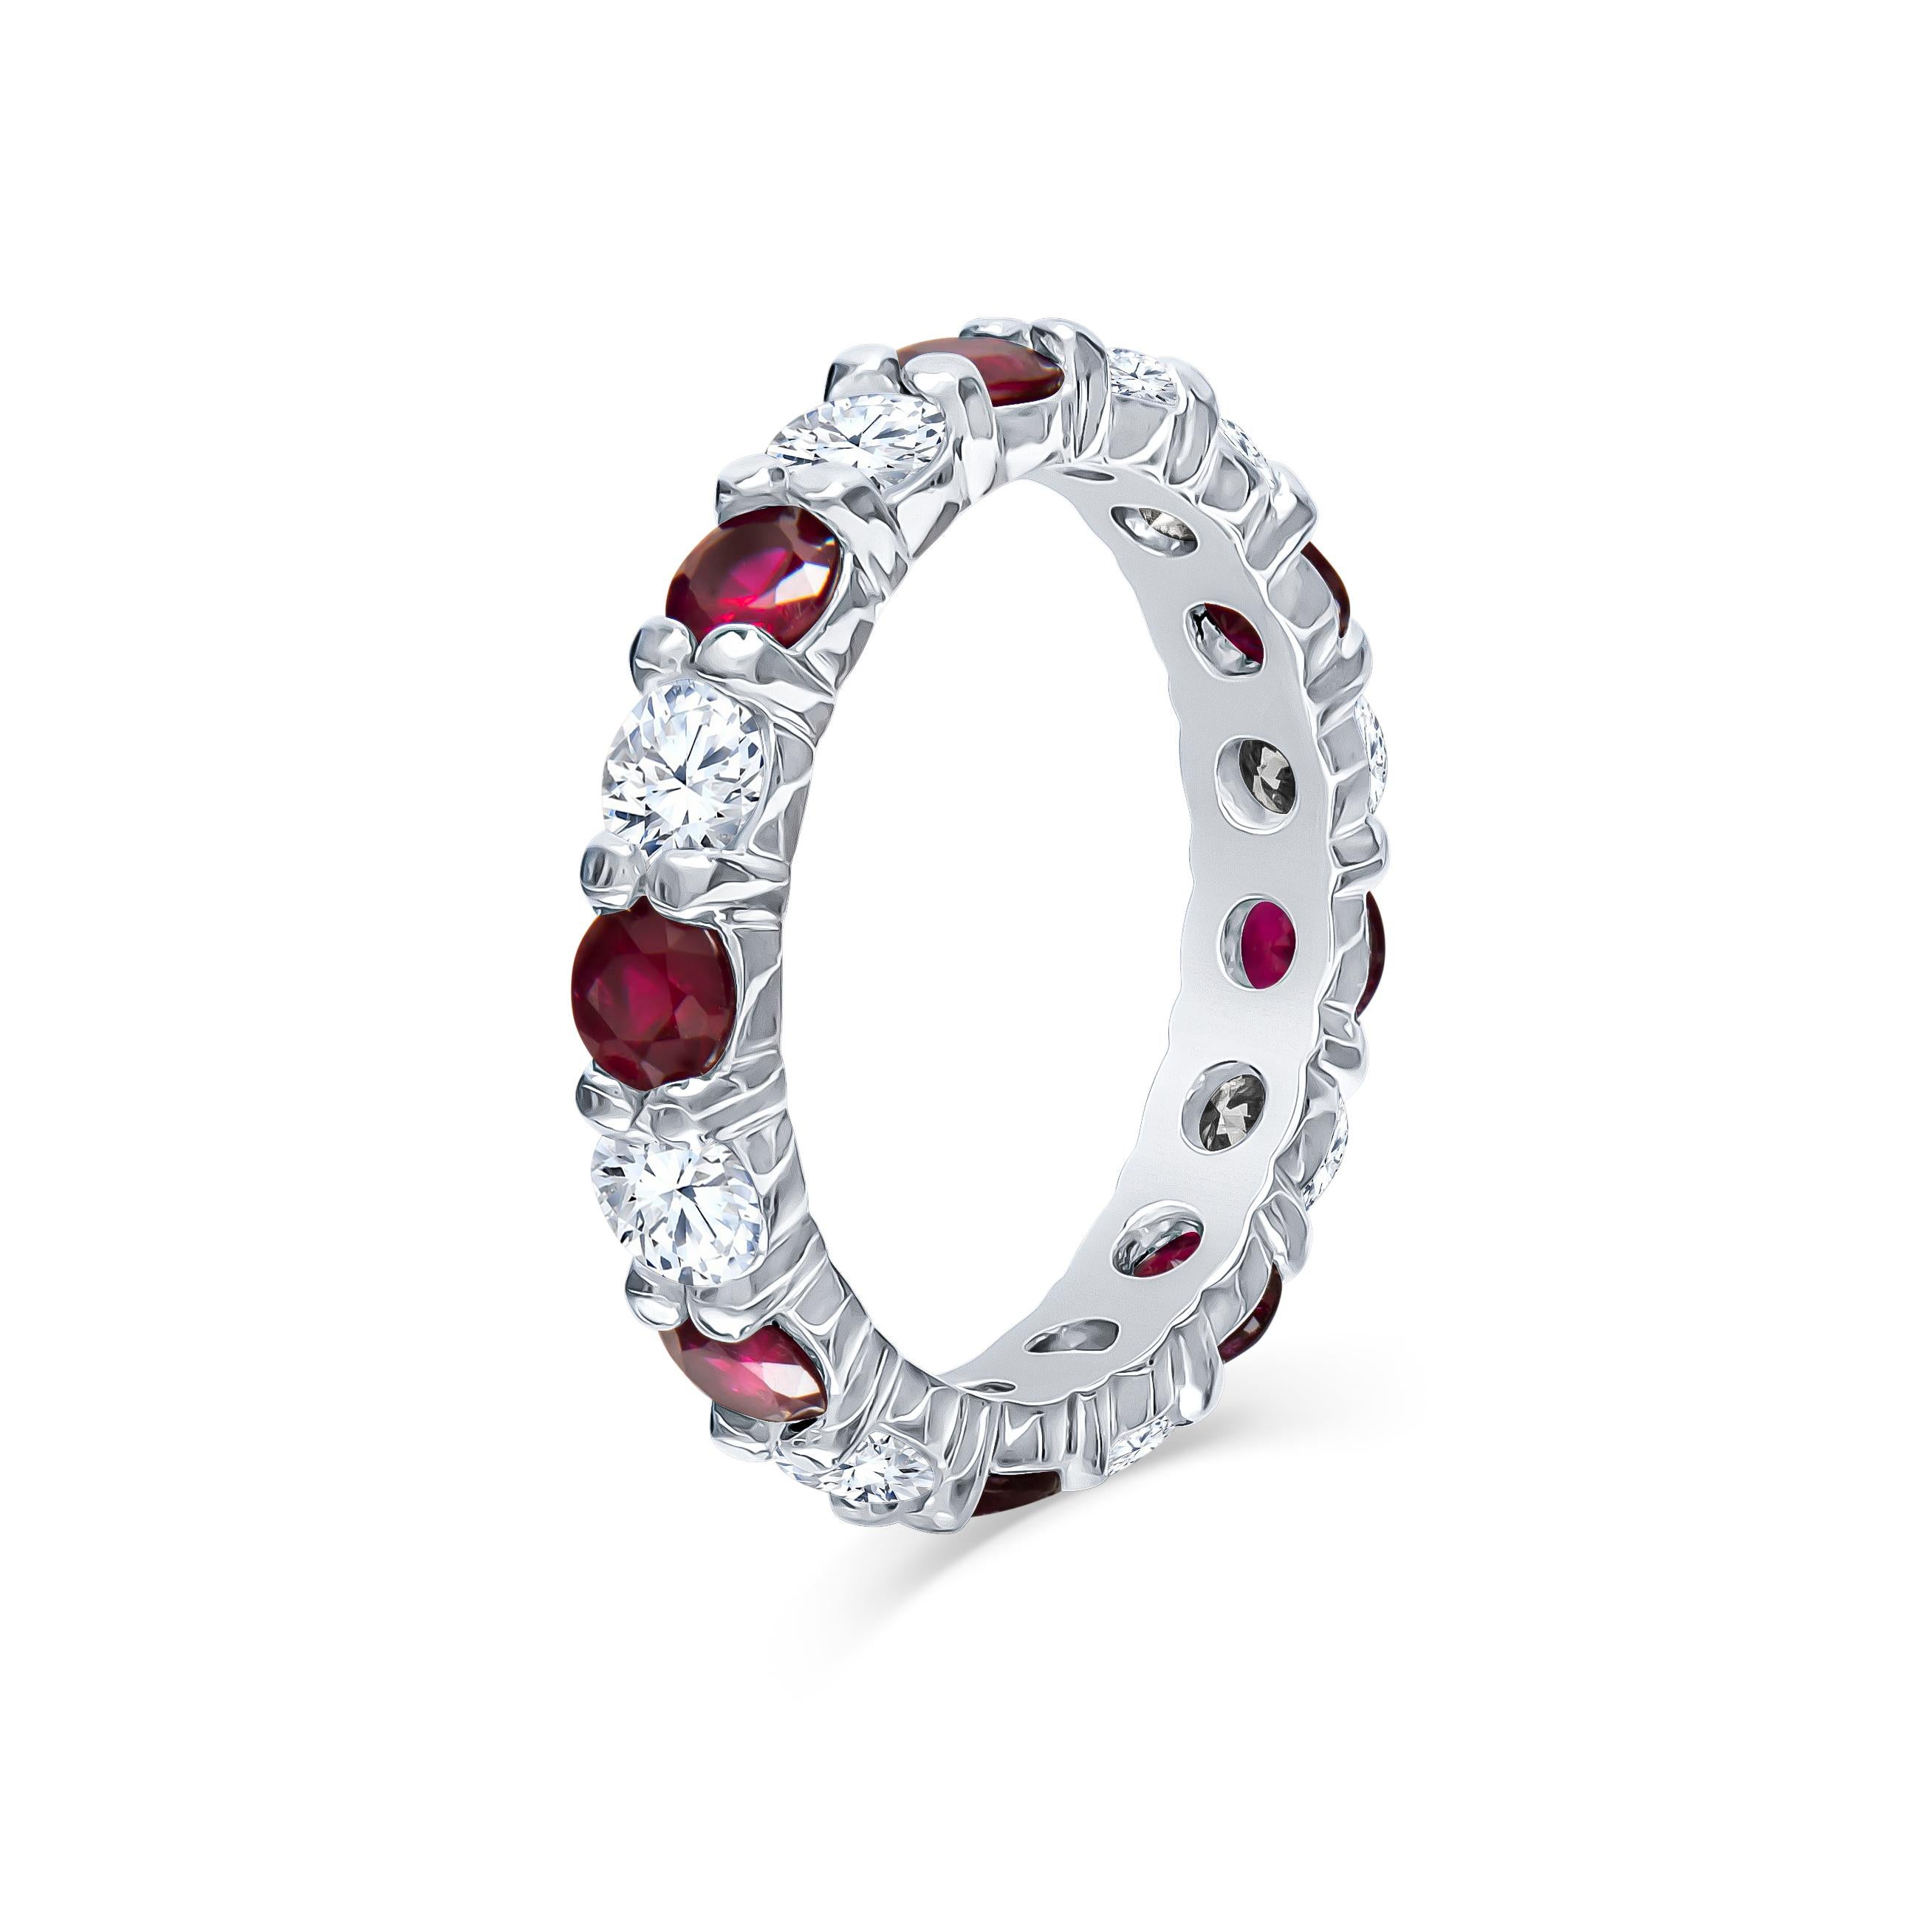 1.49 Carats total of fine round rubies and 1.53 carats total in round brilliant cut diamonds perfectly set into a platinum low profile eternity band. This band wears beautifully alone or stacked with other rings that compliment the hand. Currently a